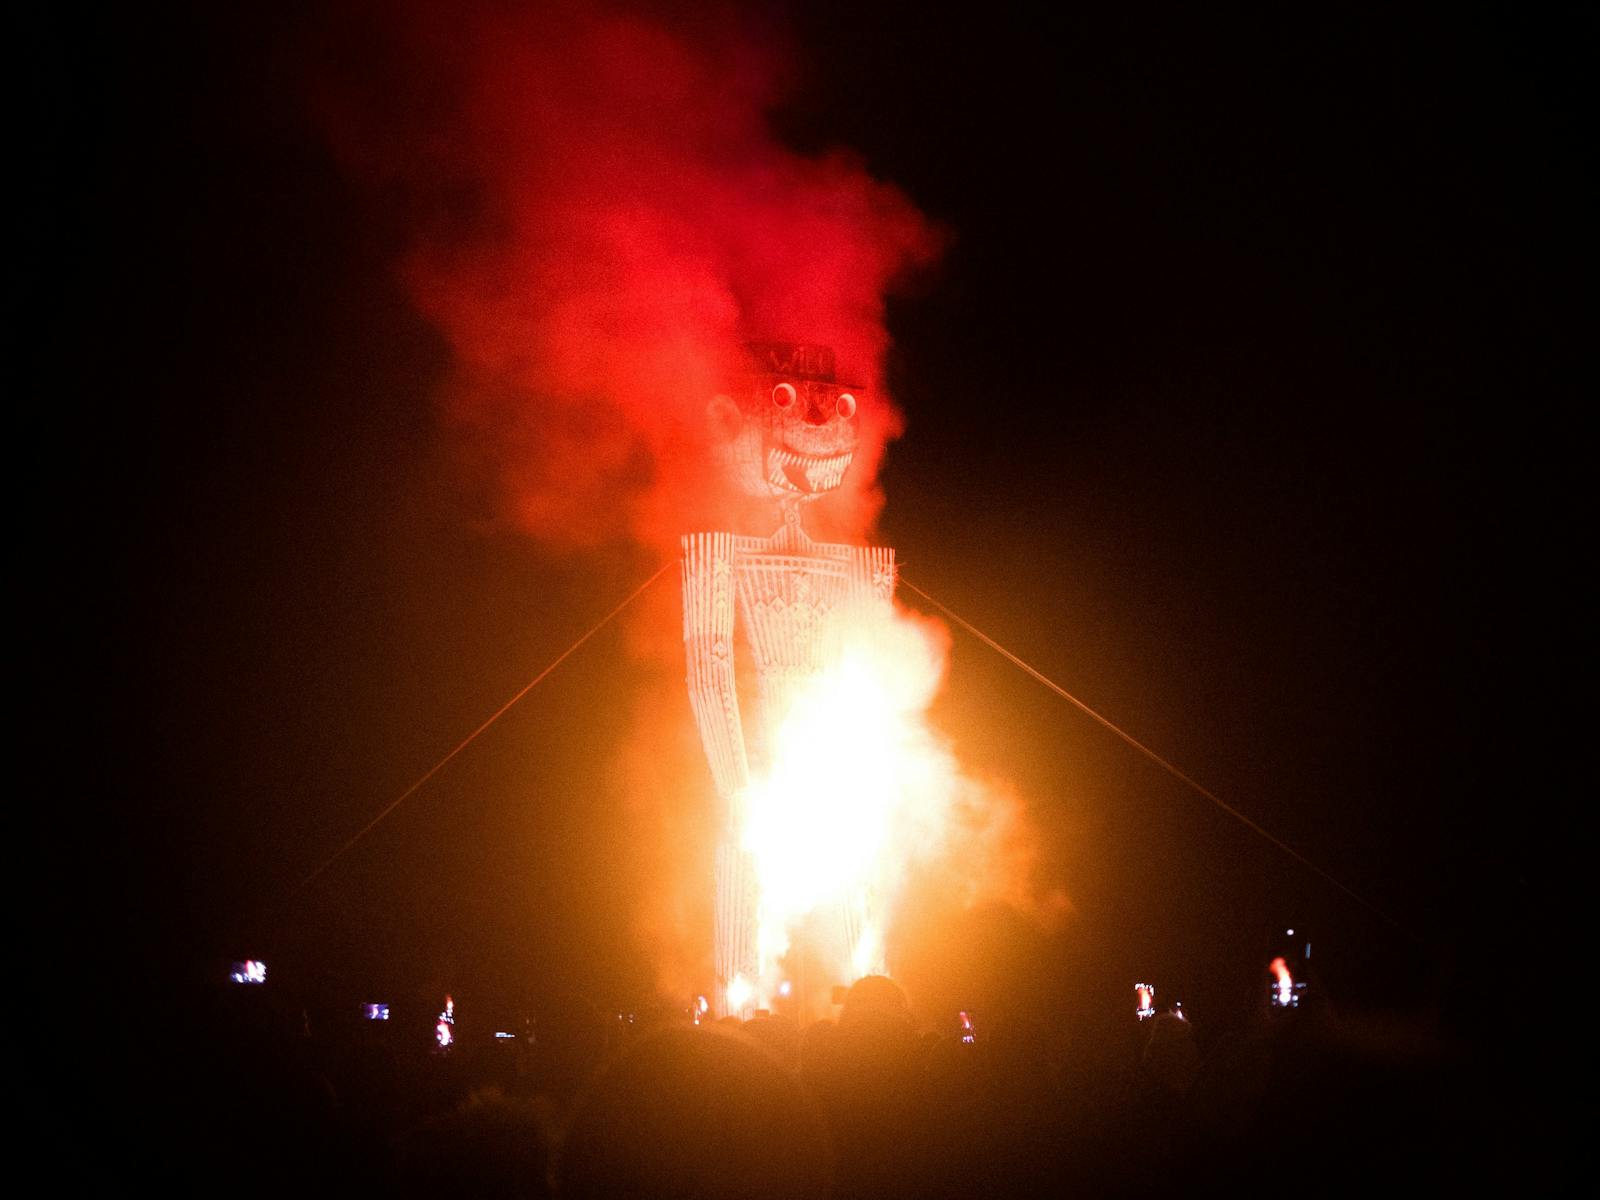 The burning man at the Mid Winter Festival